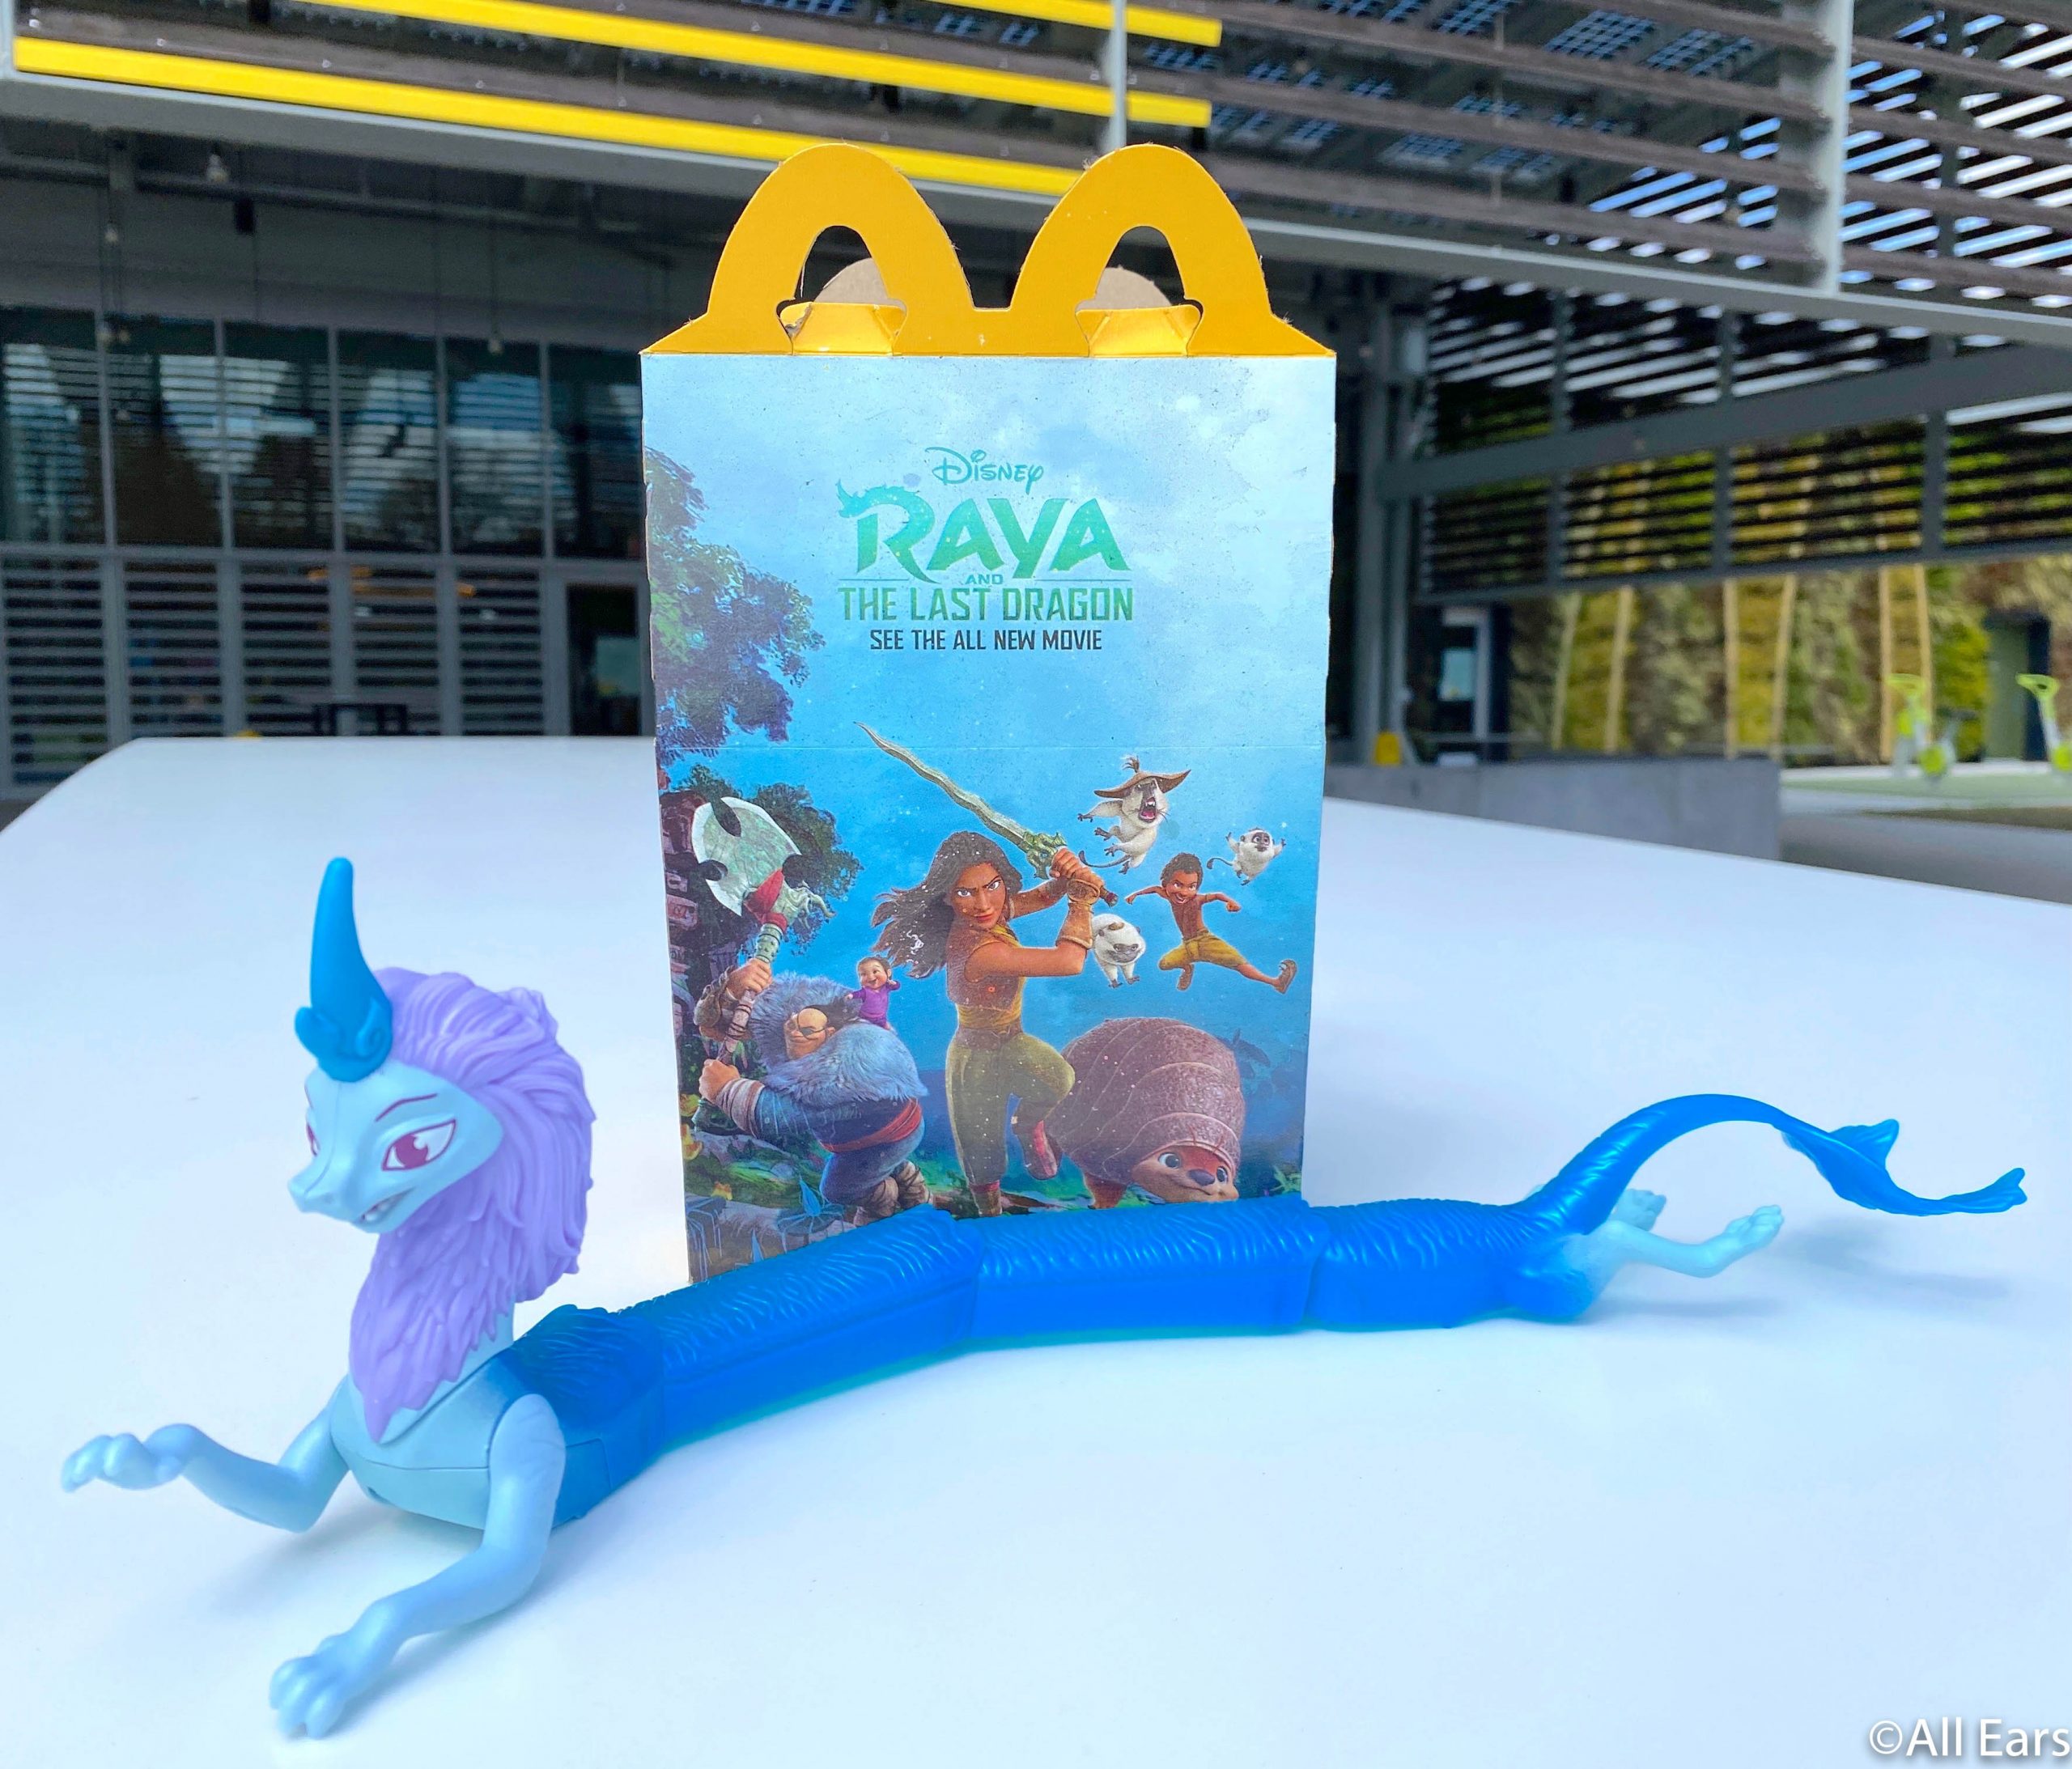 PHOTOS: 'Raya and the Last Dragon' Happy Meal Toys Are Now at McDonald's! -  AllEars.Net